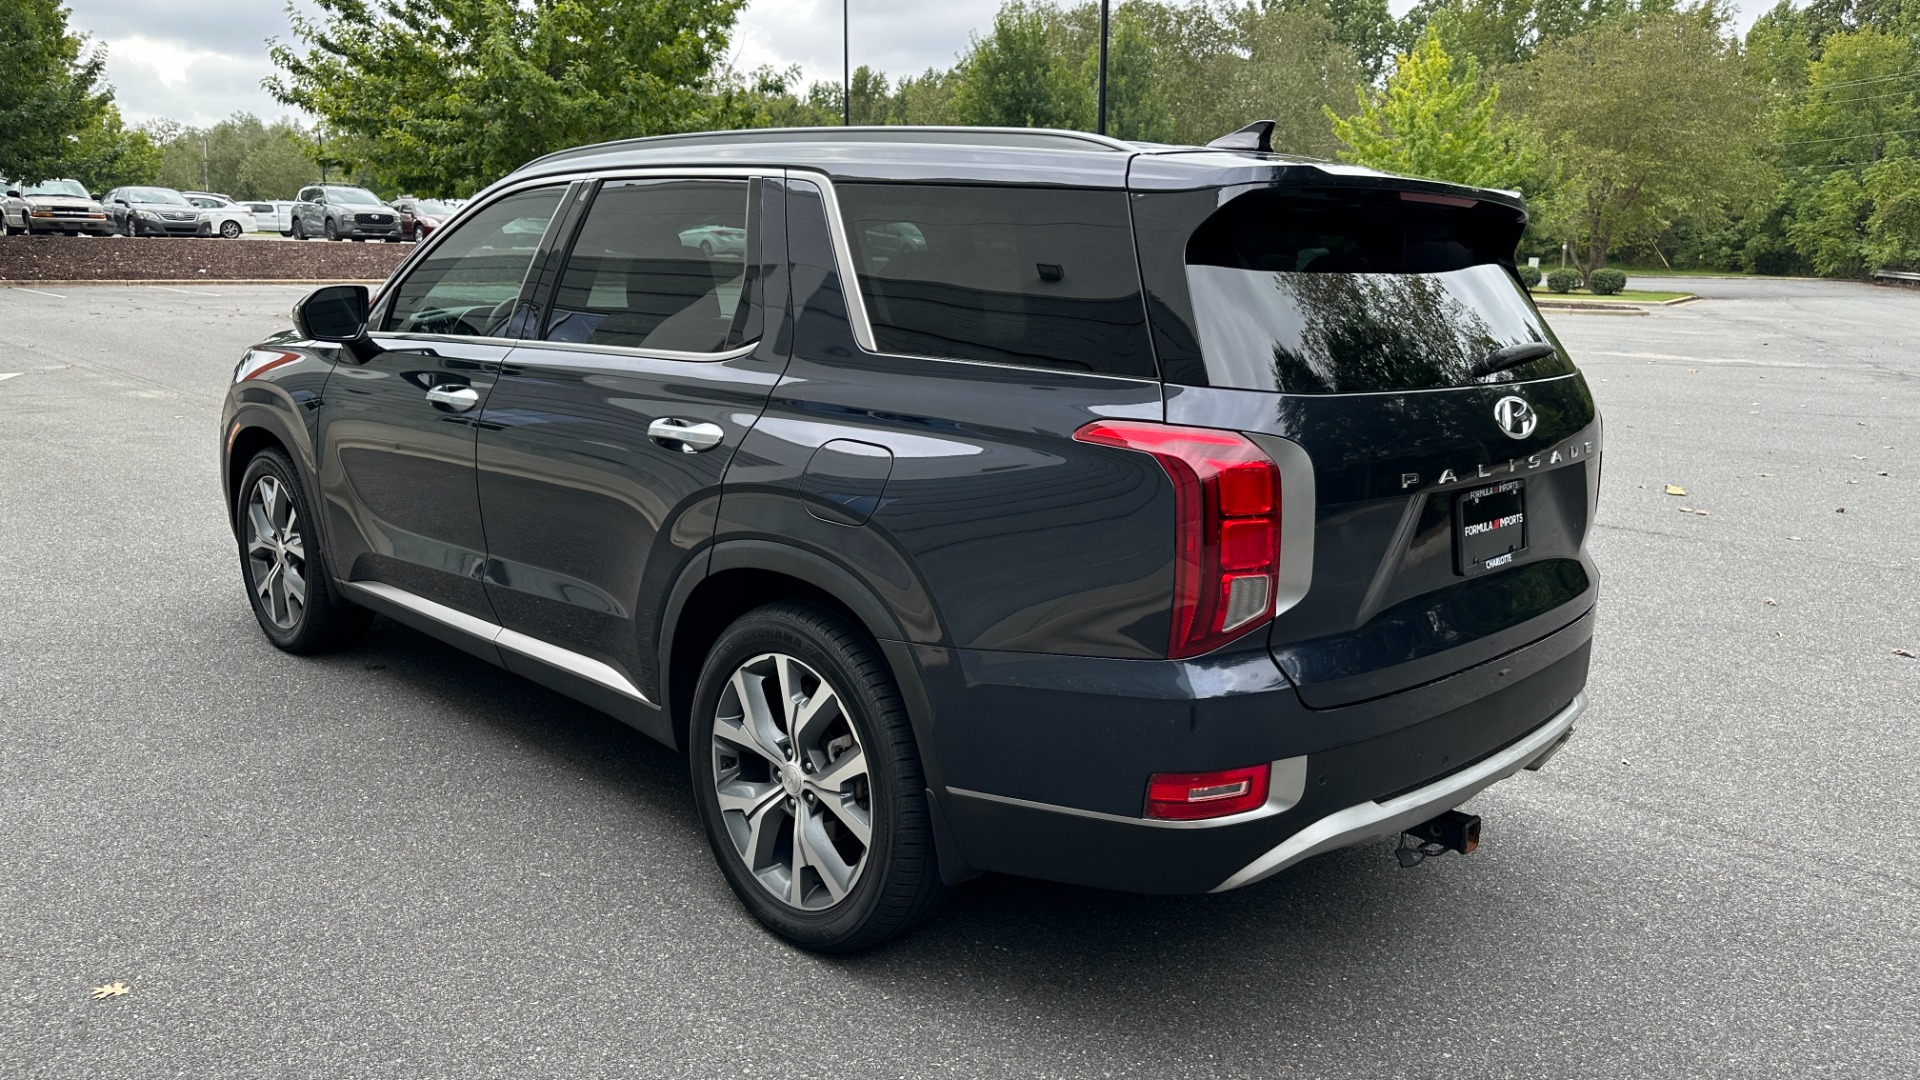 Used 2020 Hyundai Palisade SEL / CONVENIENCE / PREMIUM / SUNROOF / DRIVE GUIDANCE for sale $30,995 at Formula Imports in Charlotte NC 28227 7